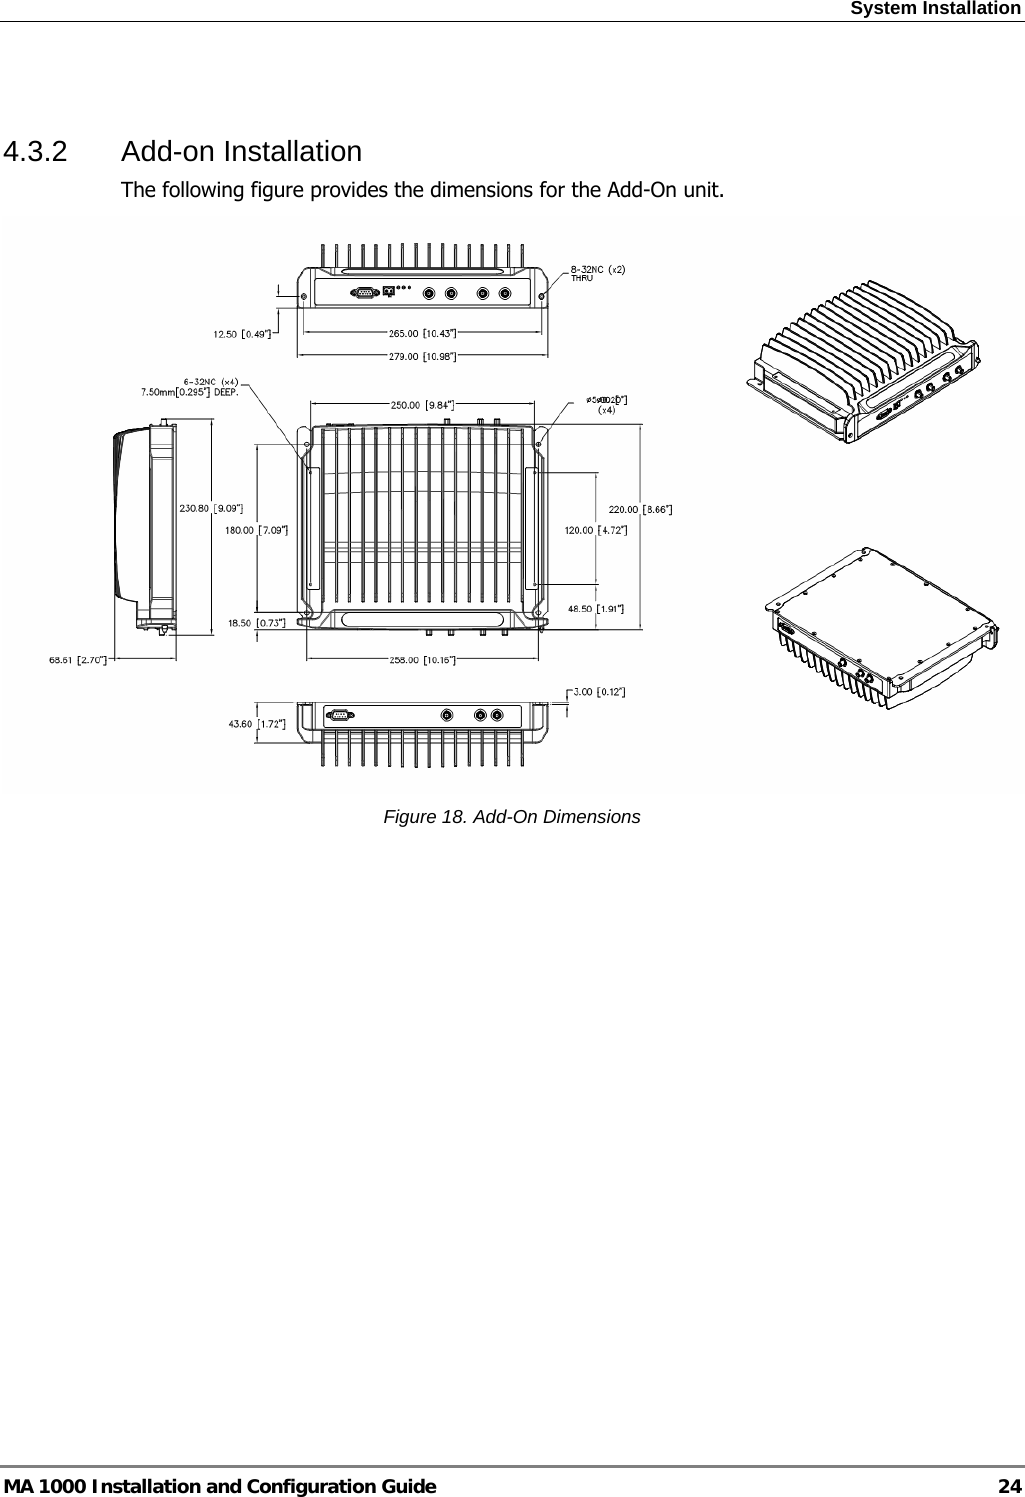 System Installation  MA 1000 Installation and Configuration Guide  24   4.3.2 Add-on Installation The following figure provides the dimensions for the Add-On unit.  Figure 18. Add-On Dimensions 